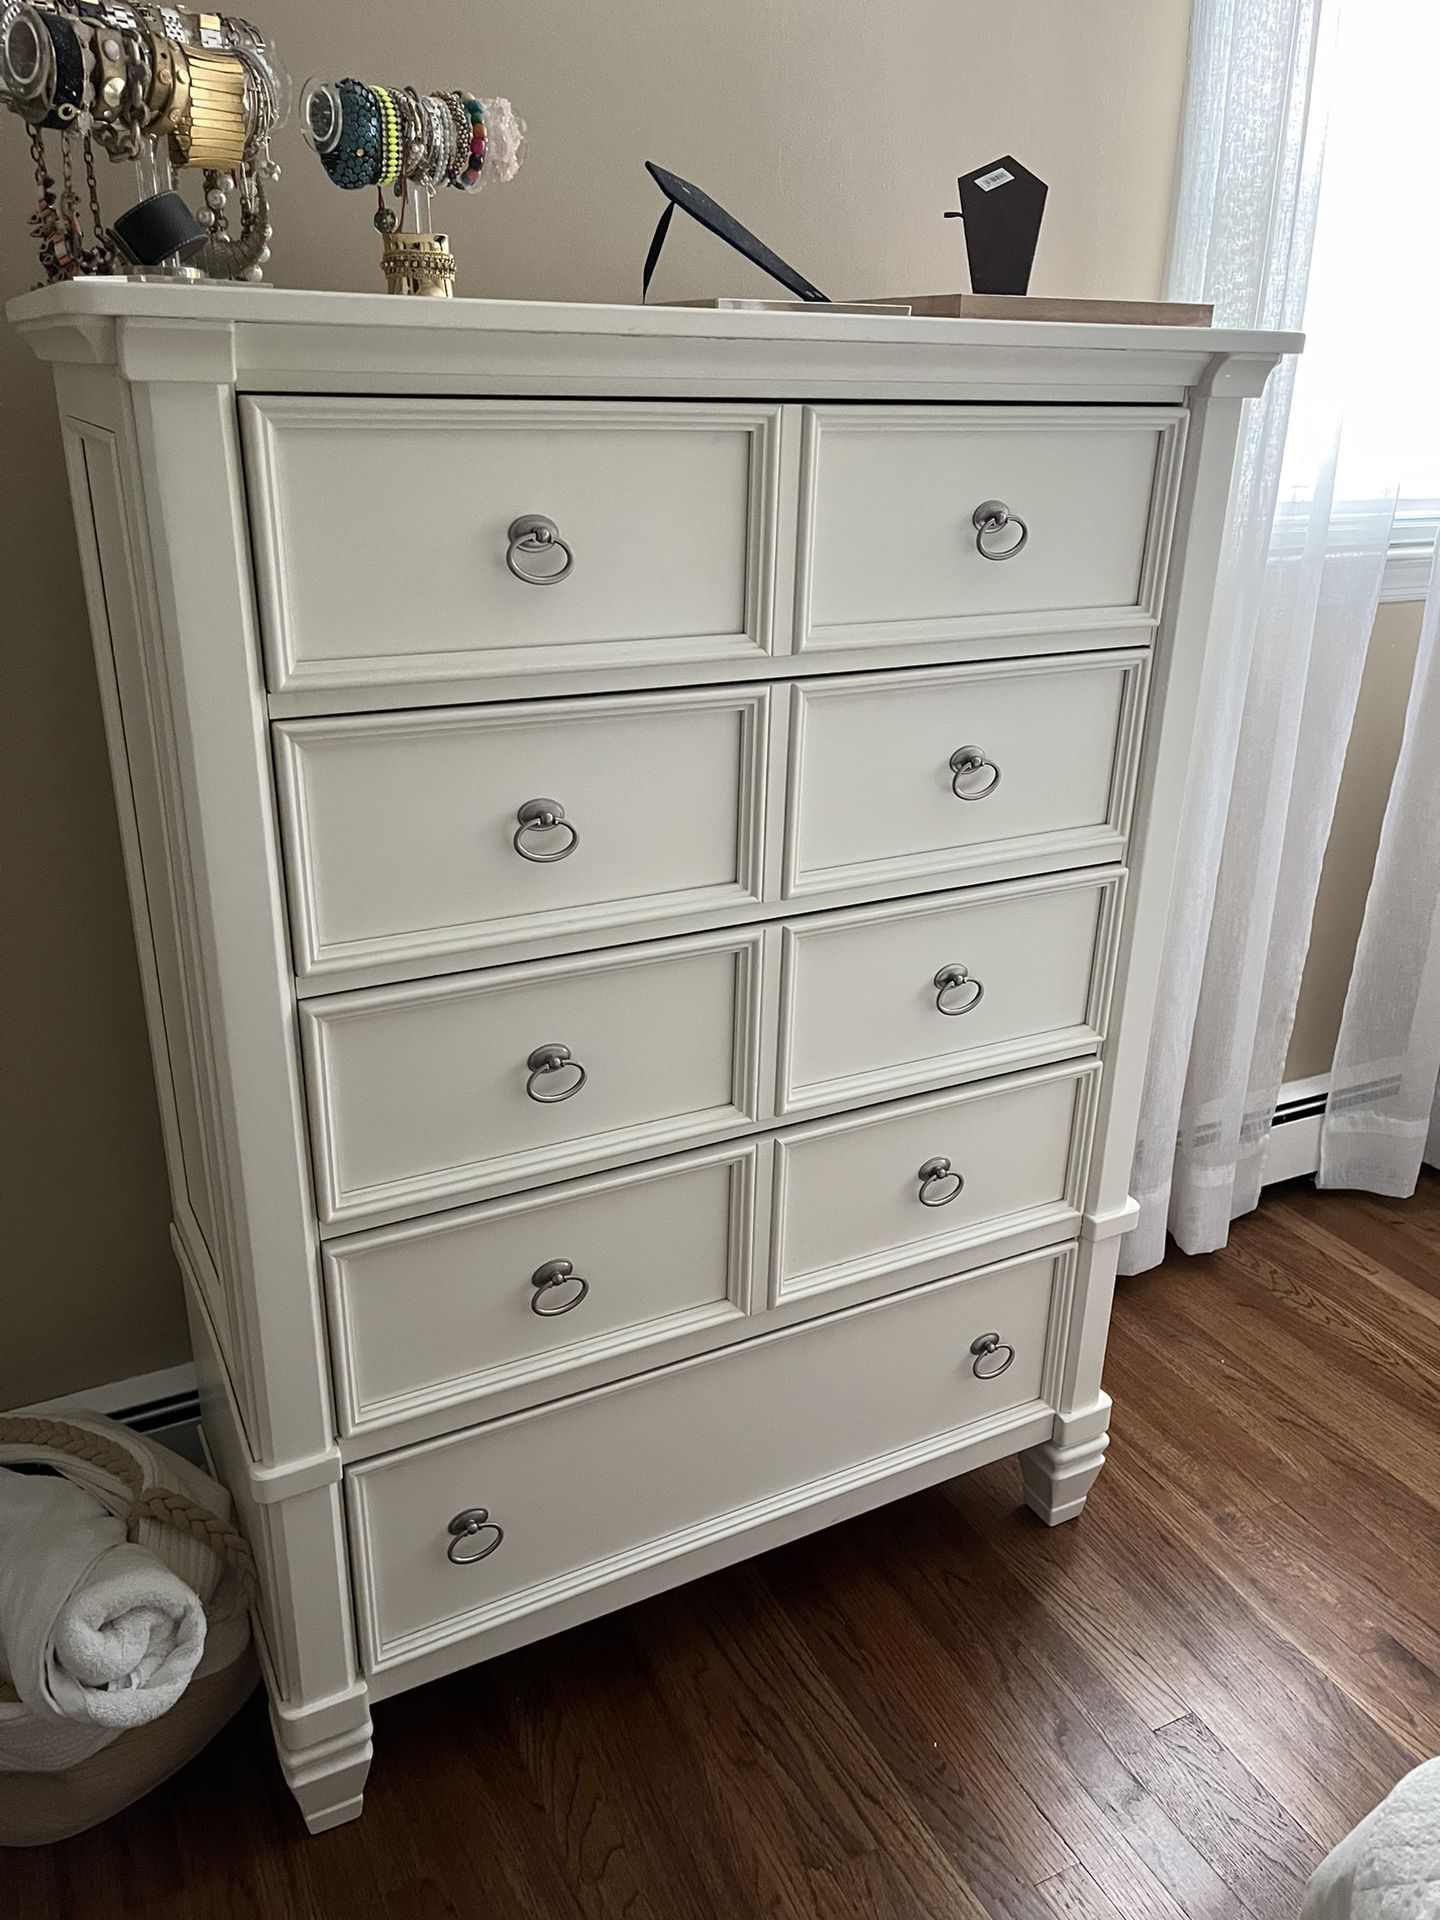 Set Of Dressers for Sale in Township Of Washington, NJ - OfferUp